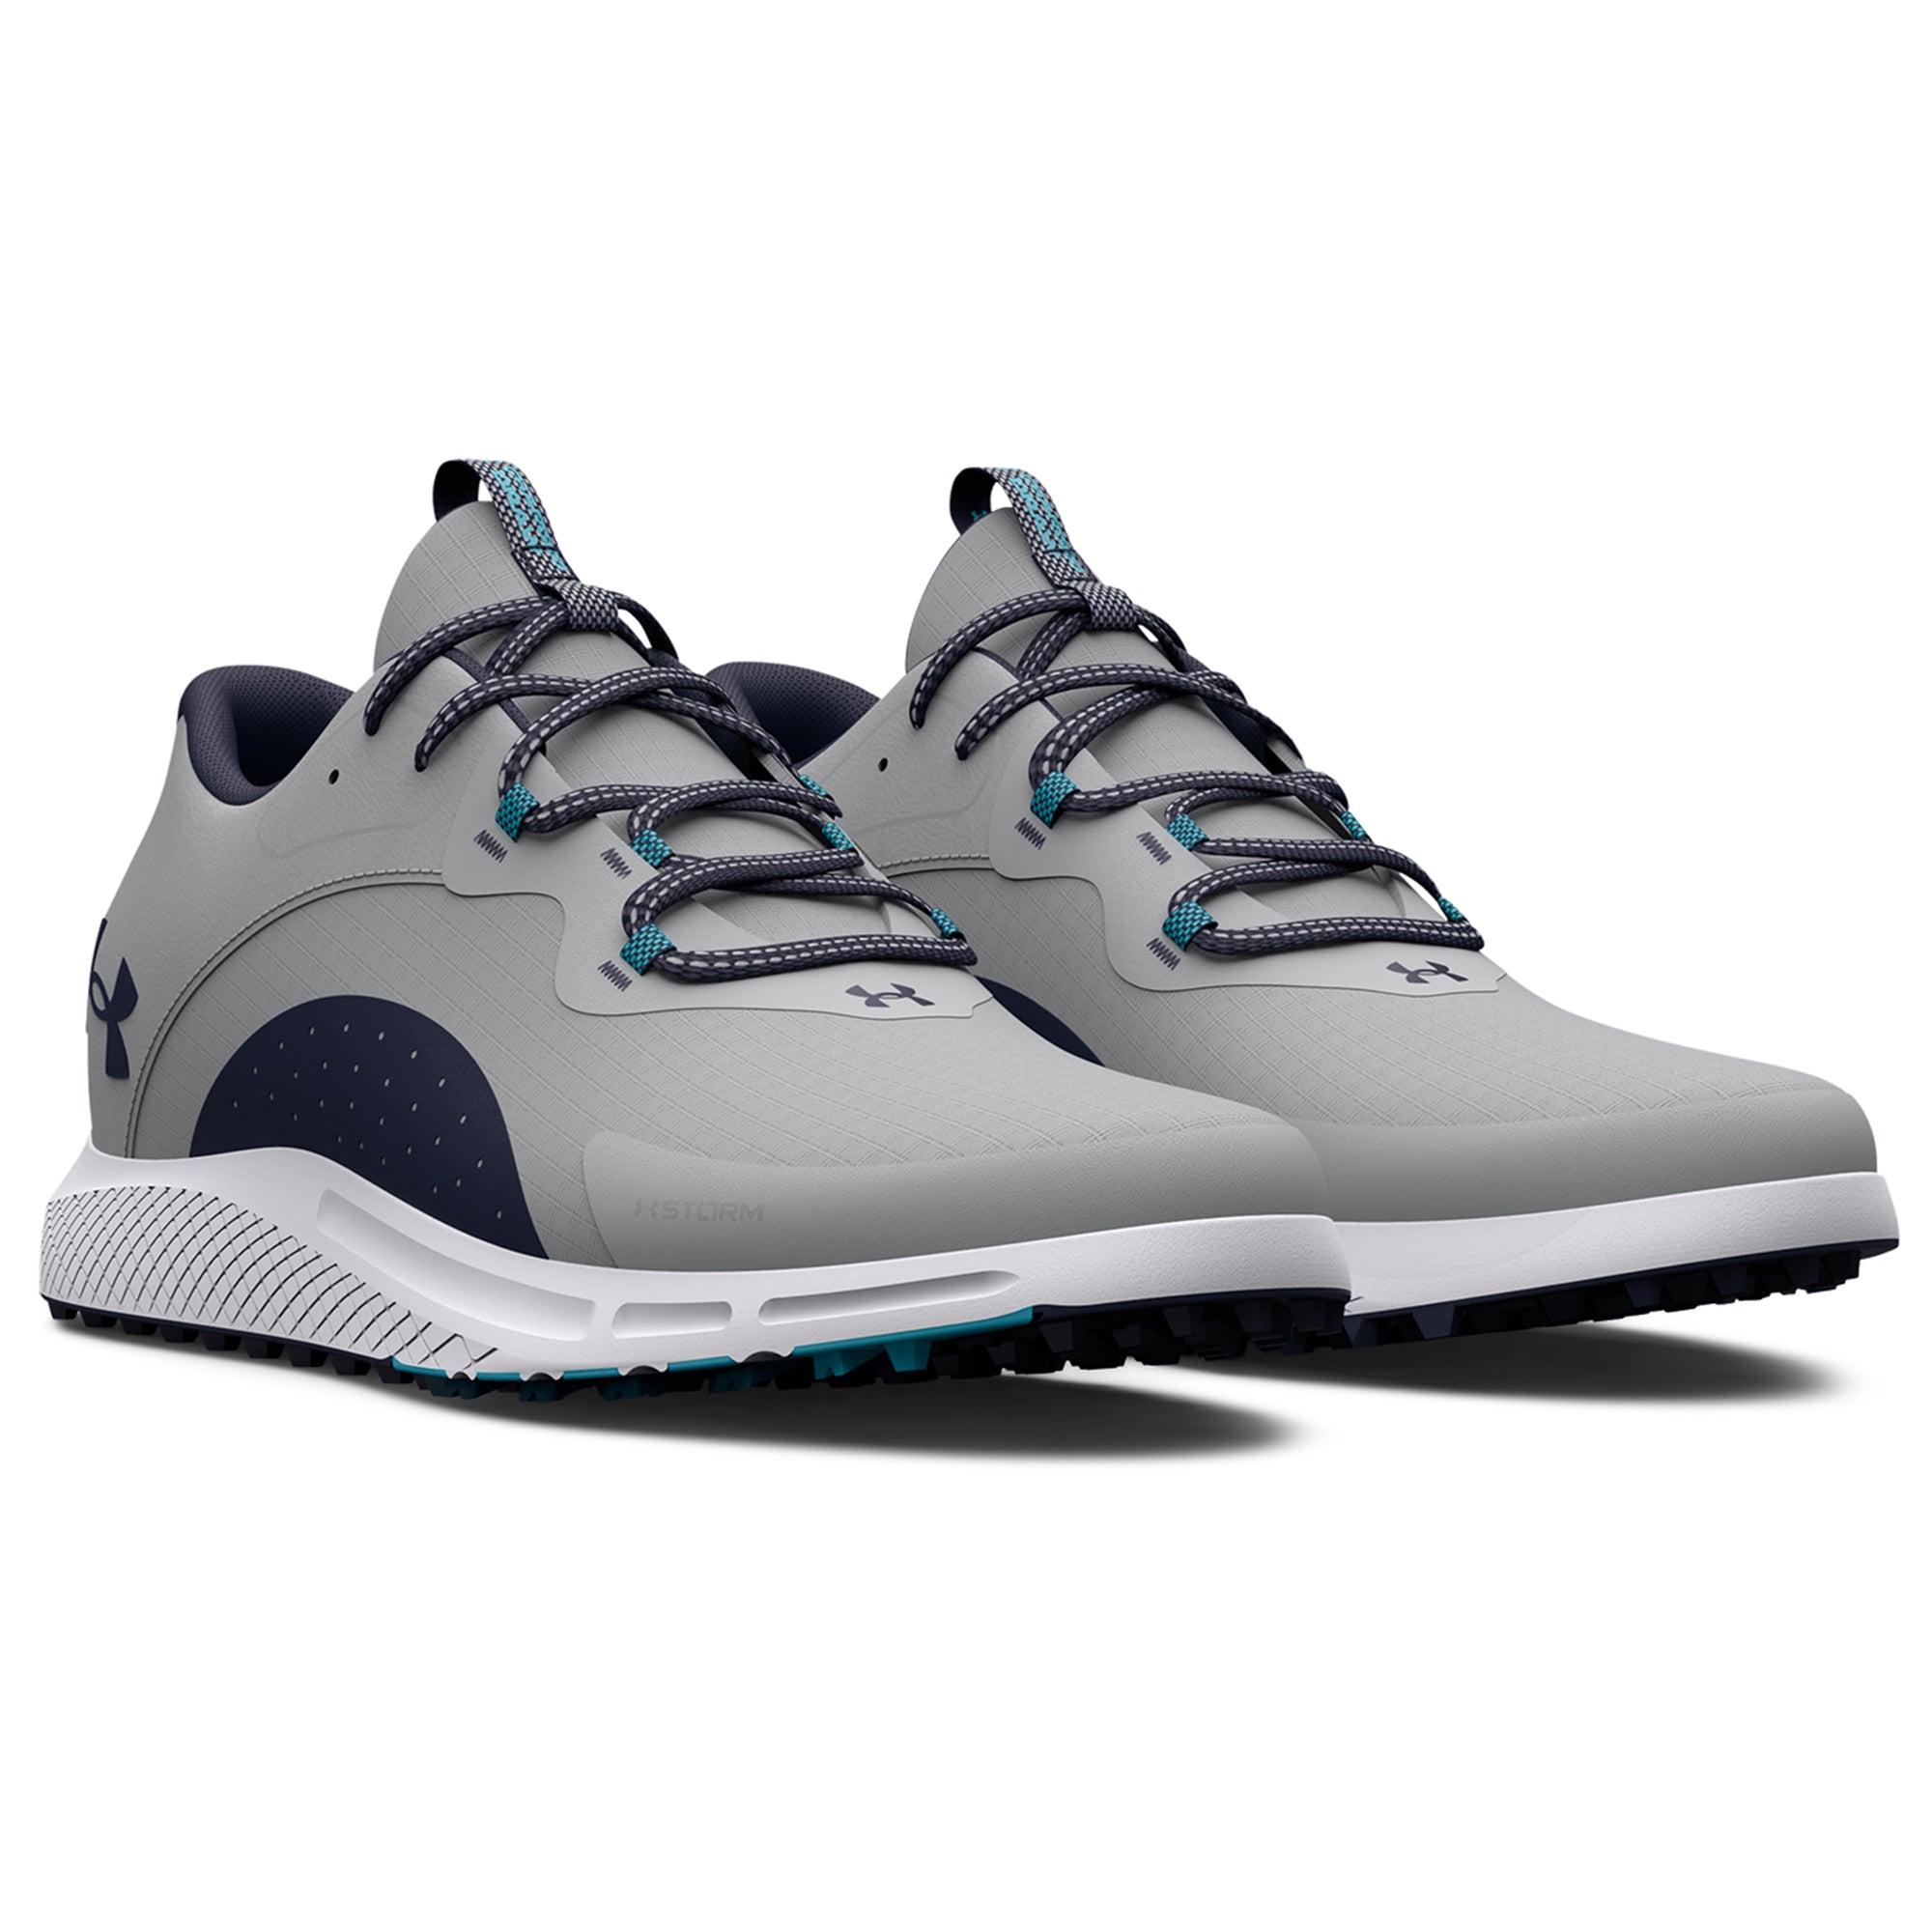 under-armour-charged-draw-2-sl-golf-shoes-3026399-mod-grey-midnight-navy-101